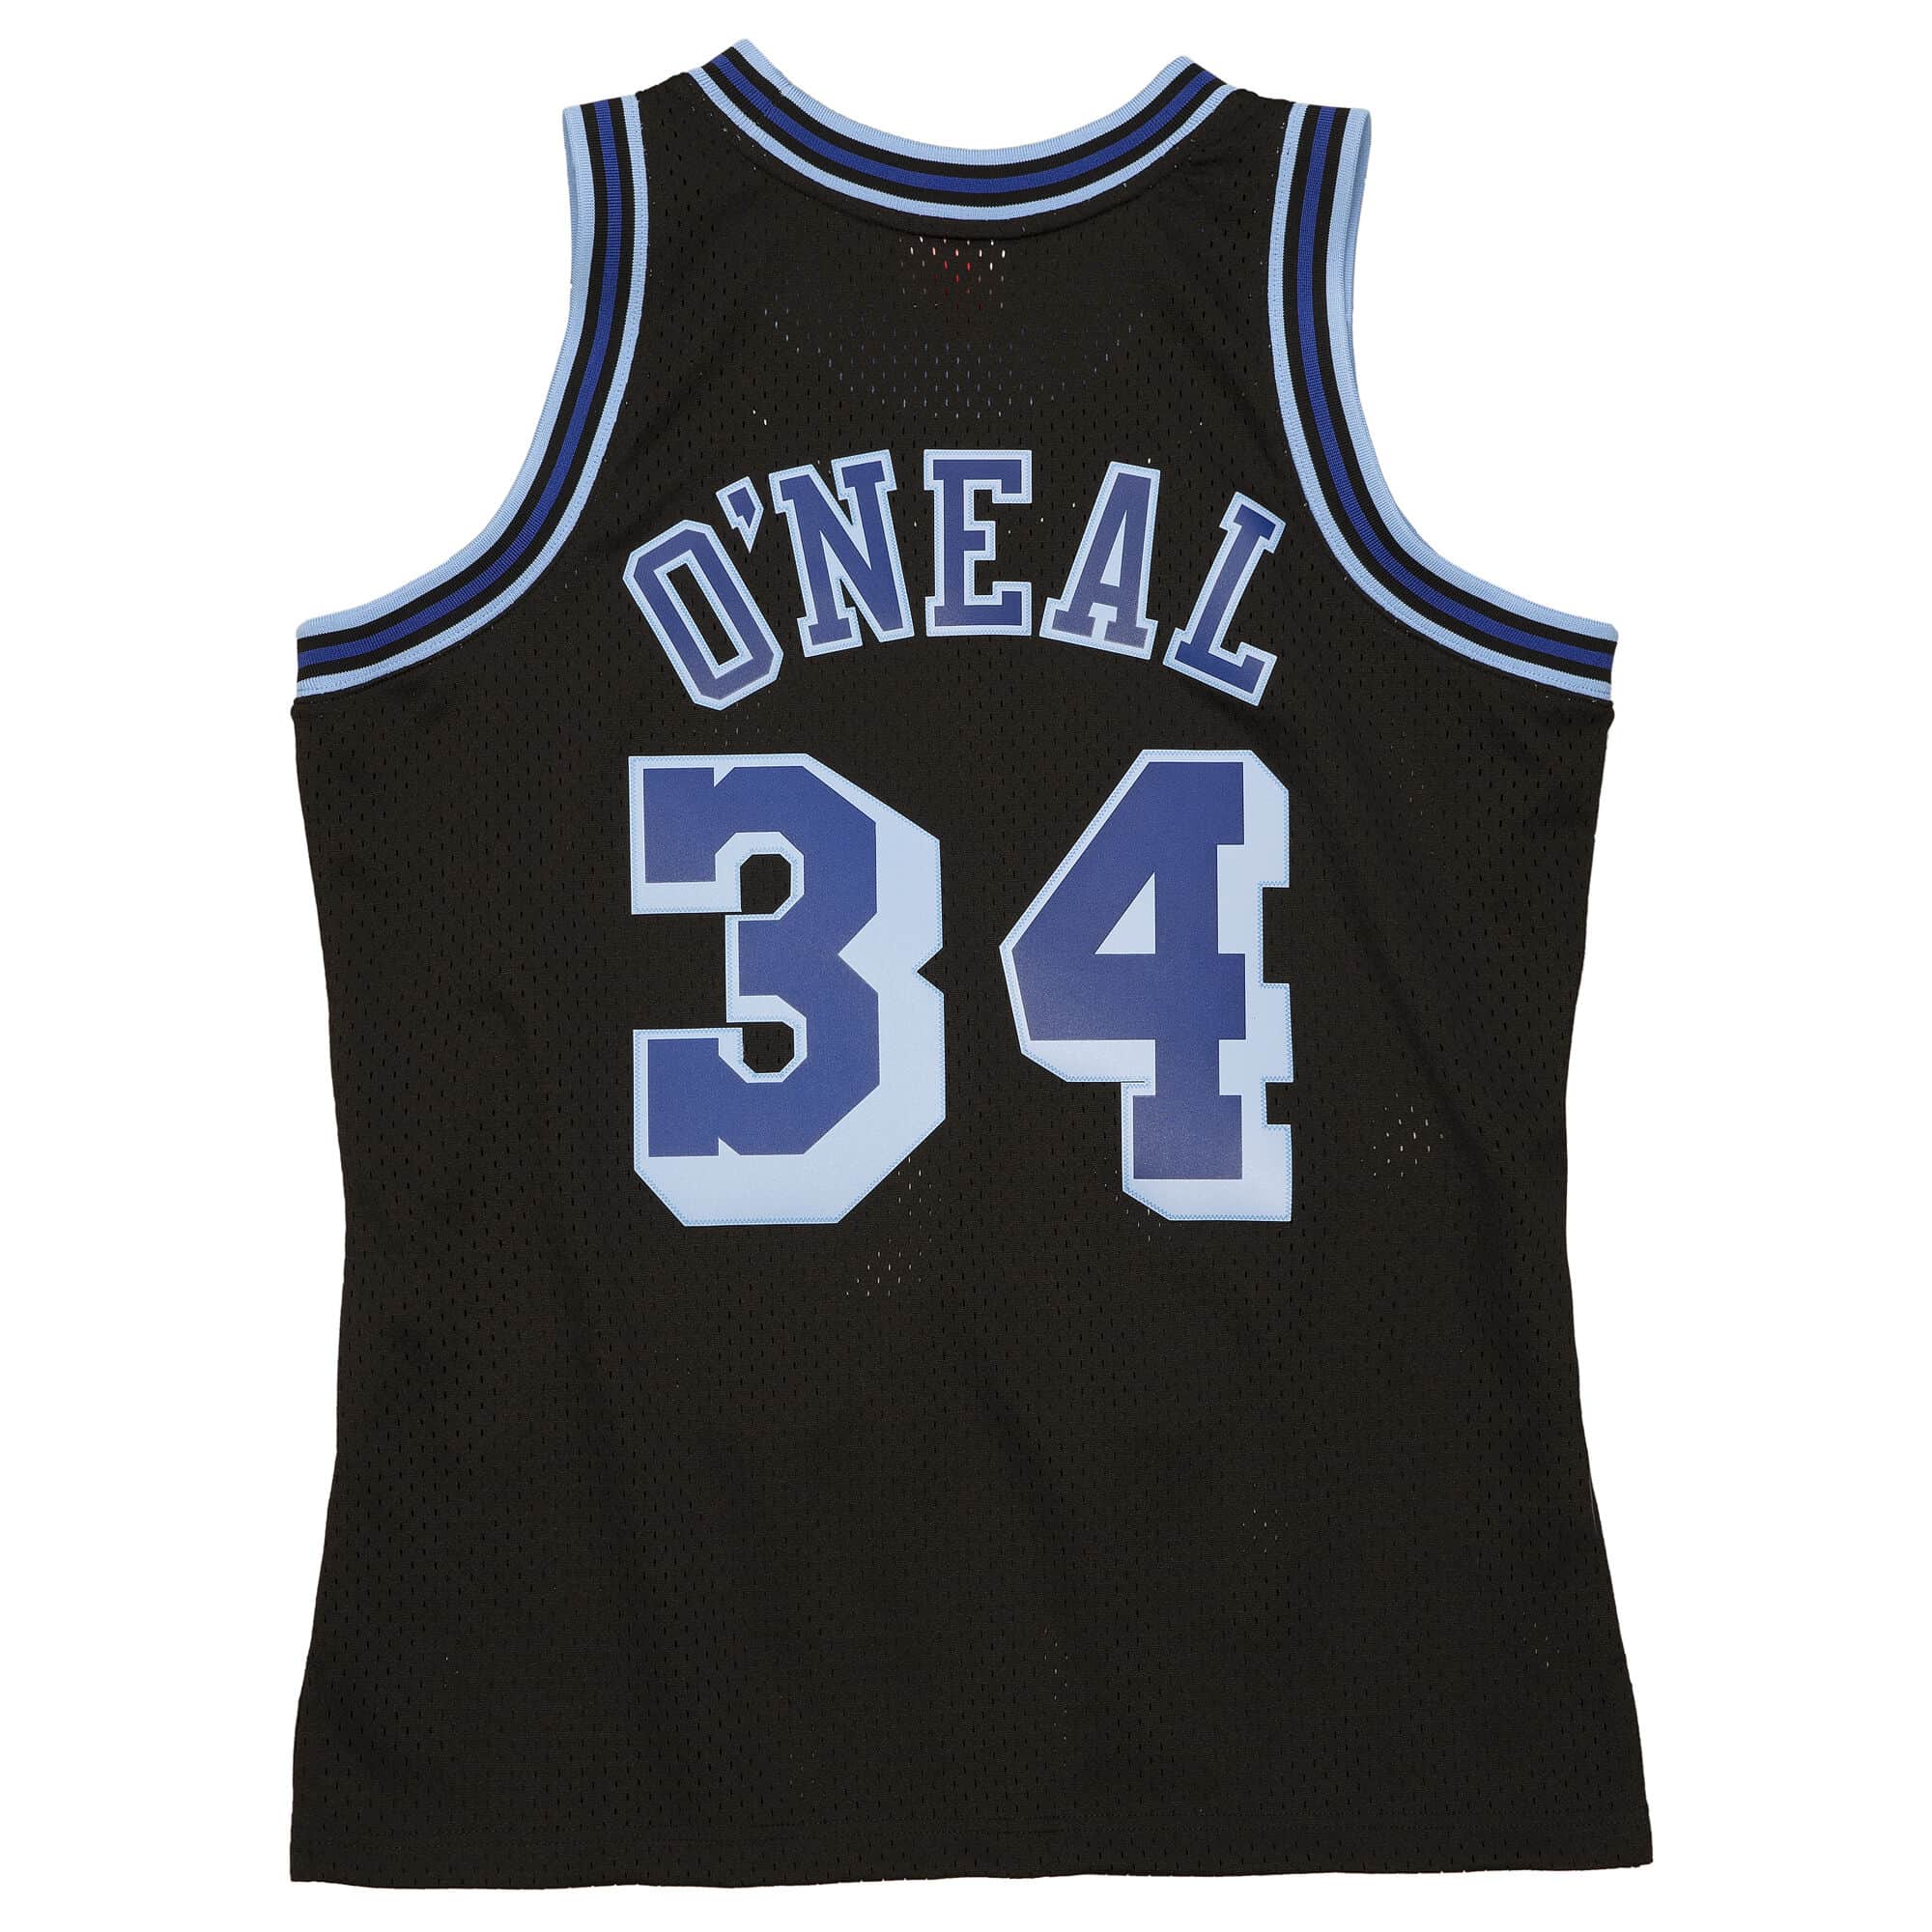 MITCHELL & NESS BLACK/BLUE NBA LOS ANGELES LAKERS  1996-97 SHAQUILLE O'NEAL SWINGMAN JERSEY